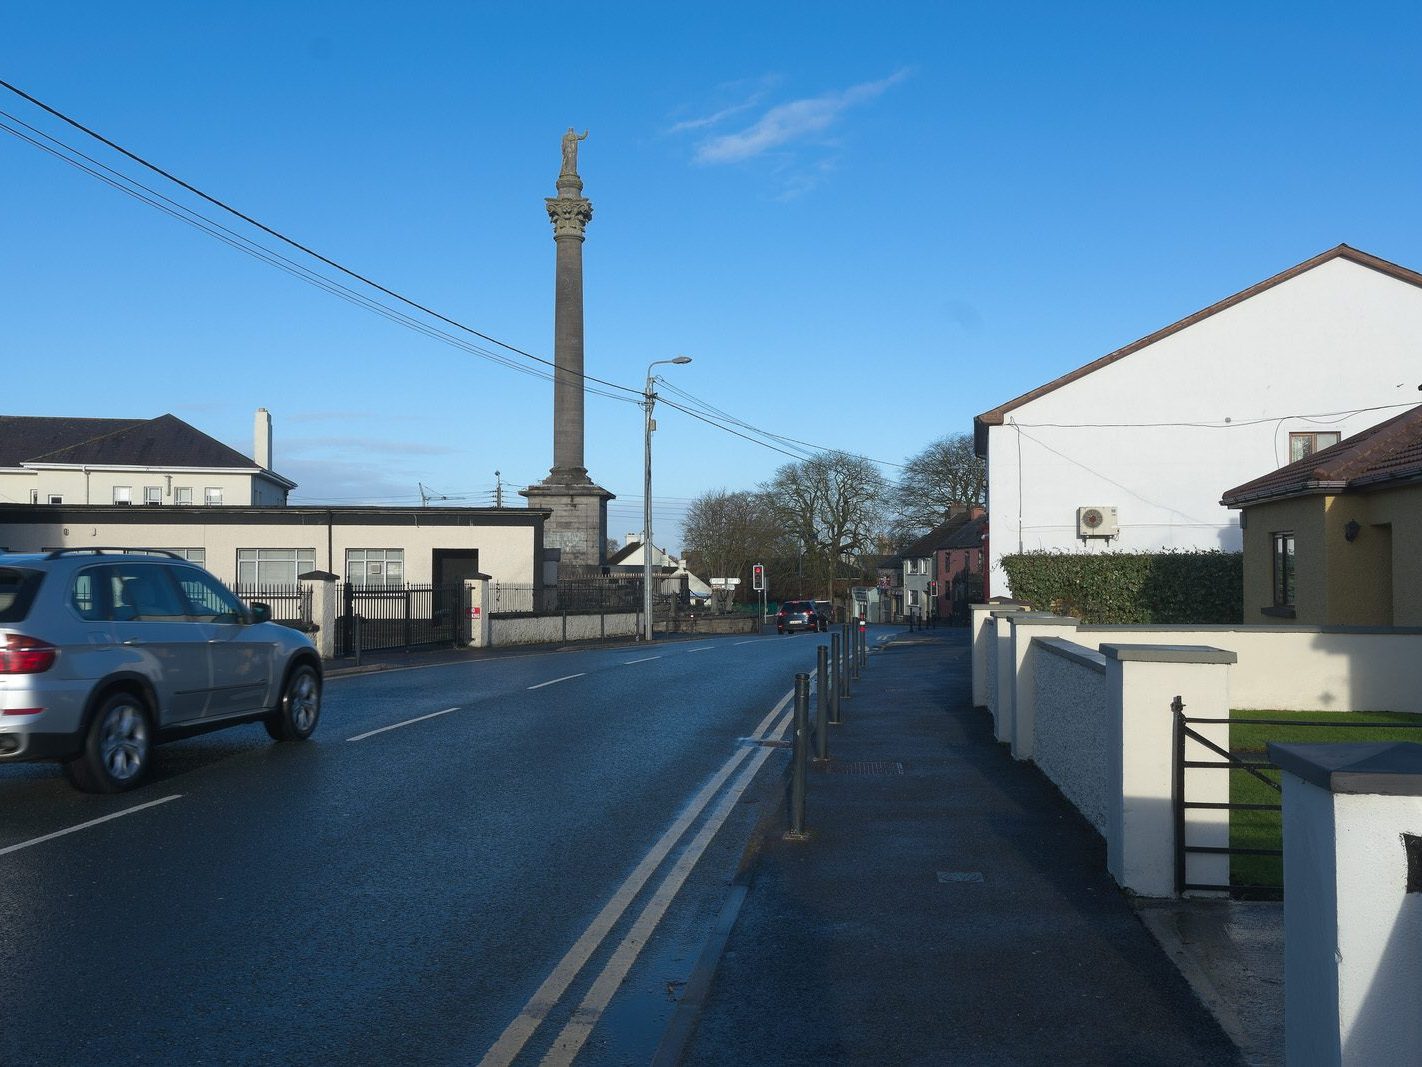 THE DUKE OF WELLINGTON MONUMENT IN TRIM [ERECTED IN 1817 AND DESIGNED BY JAMES BELL]-225066-1